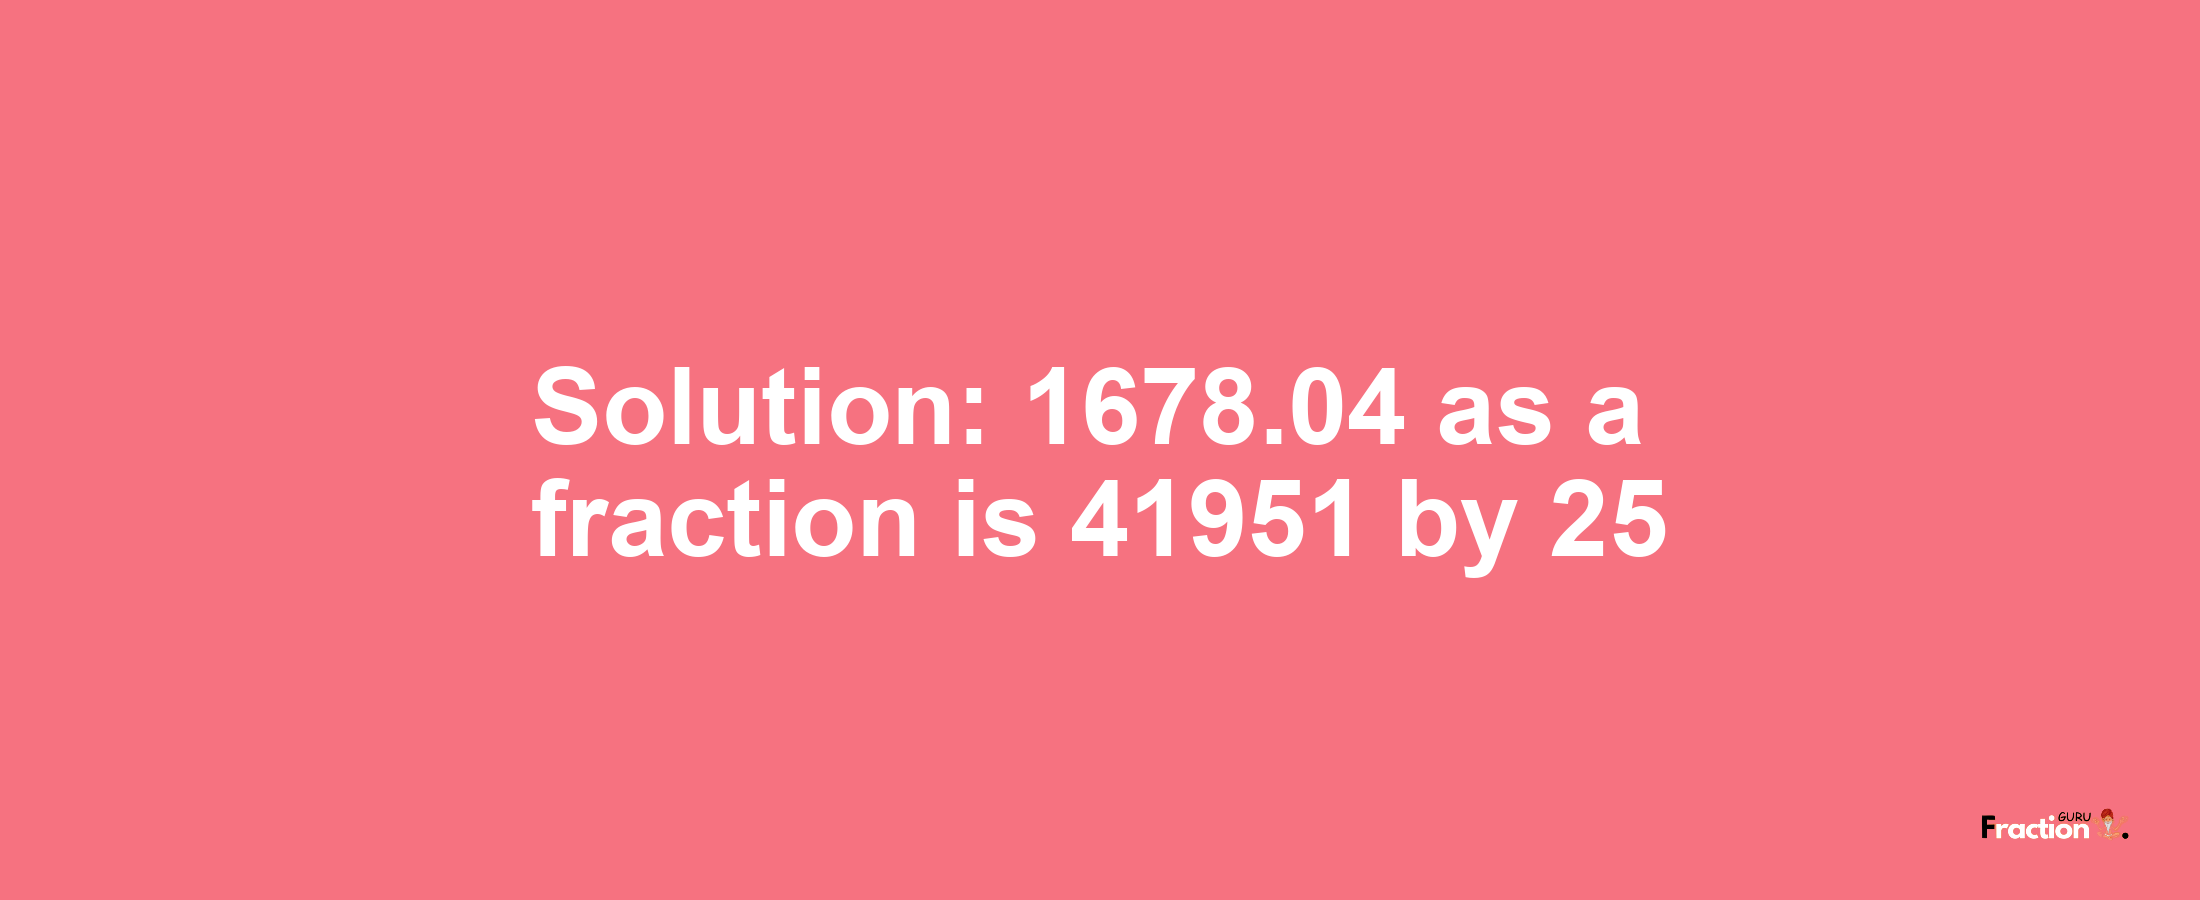 Solution:1678.04 as a fraction is 41951/25